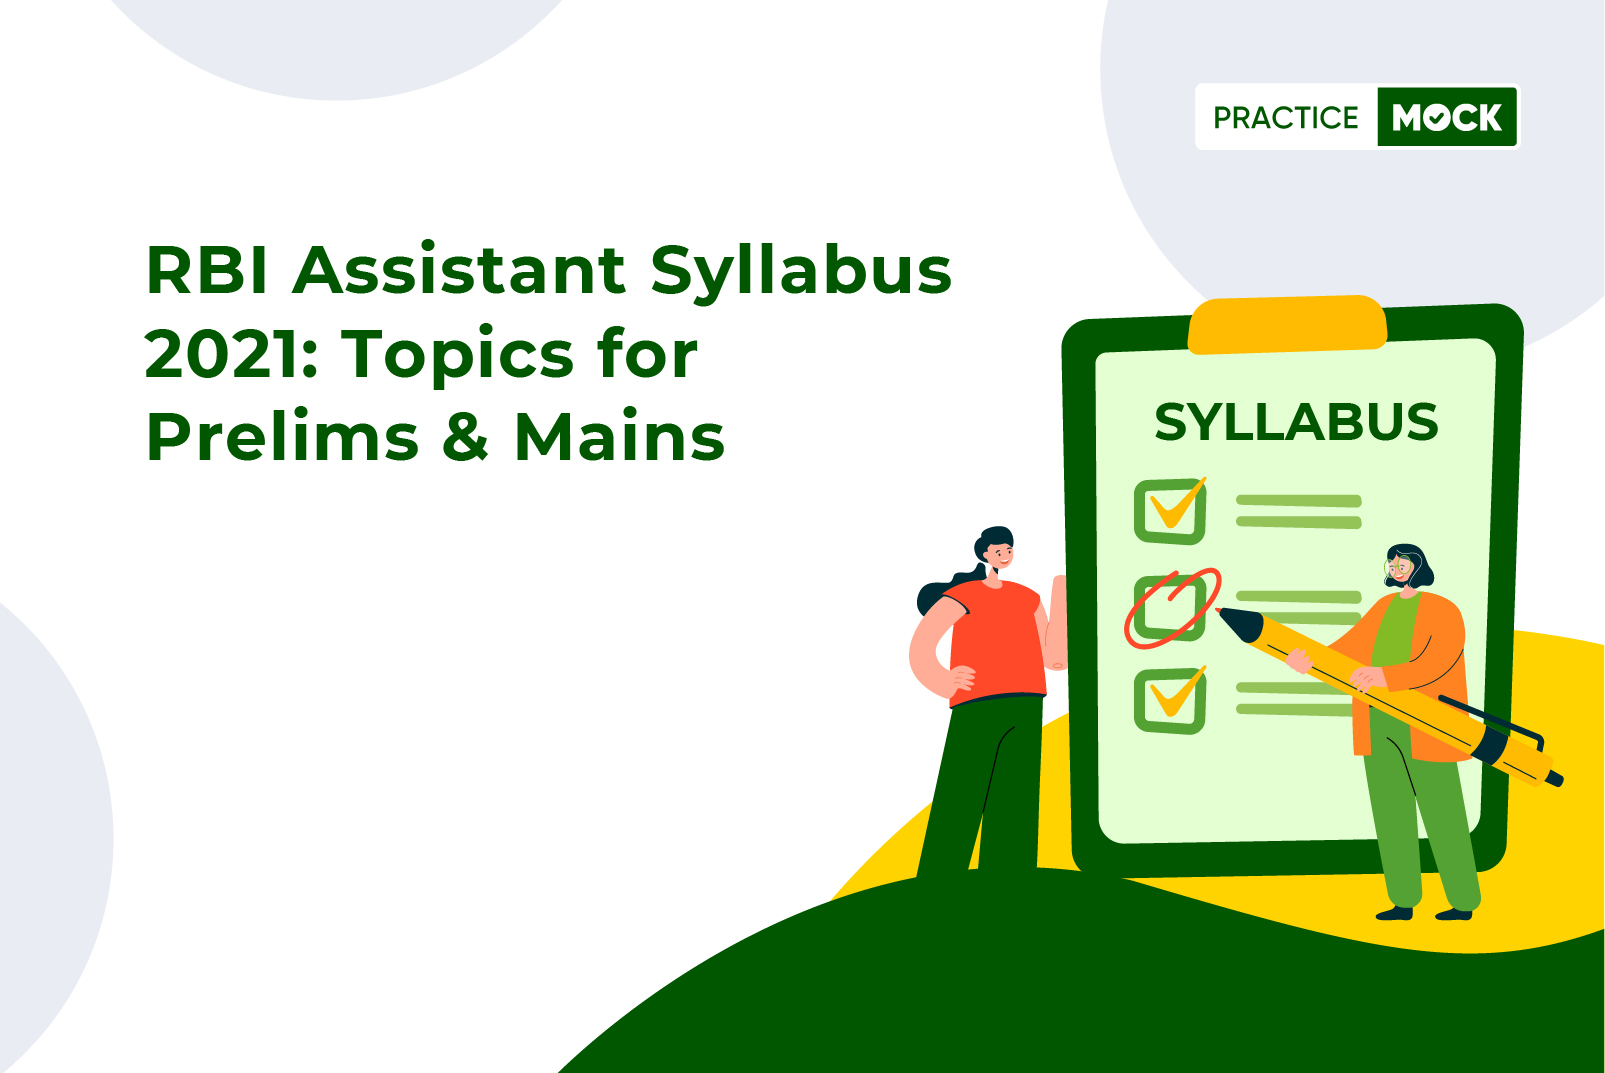 RBI Assistant Syllabus 2021 - Topics for Prelims & Mains